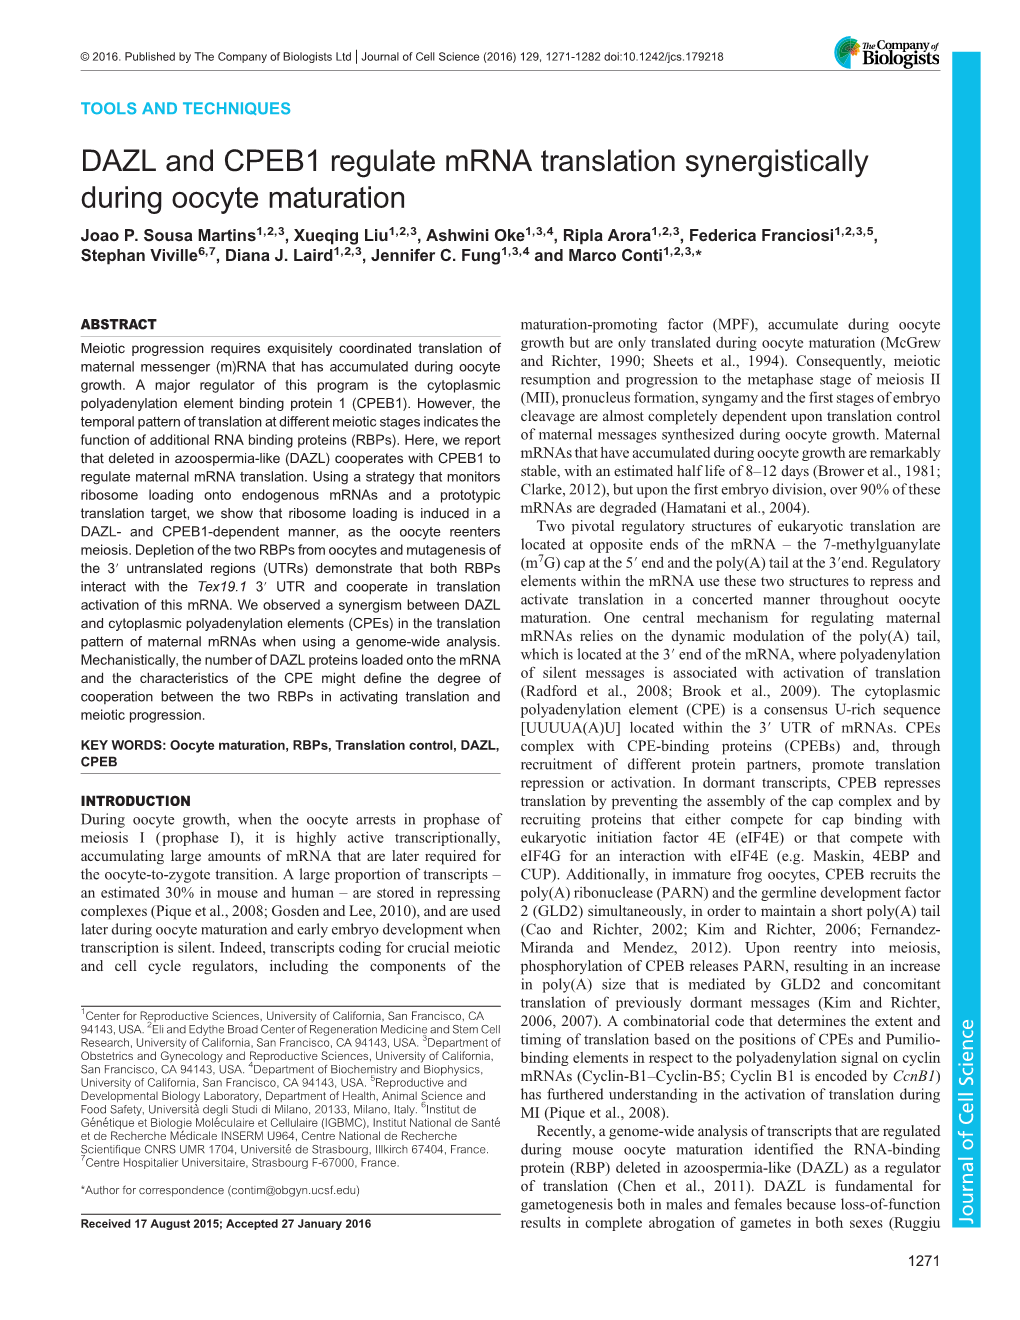 DAZL and CPEB1 Regulate Mrna Translation Synergistically During Oocyte Maturation Joao P